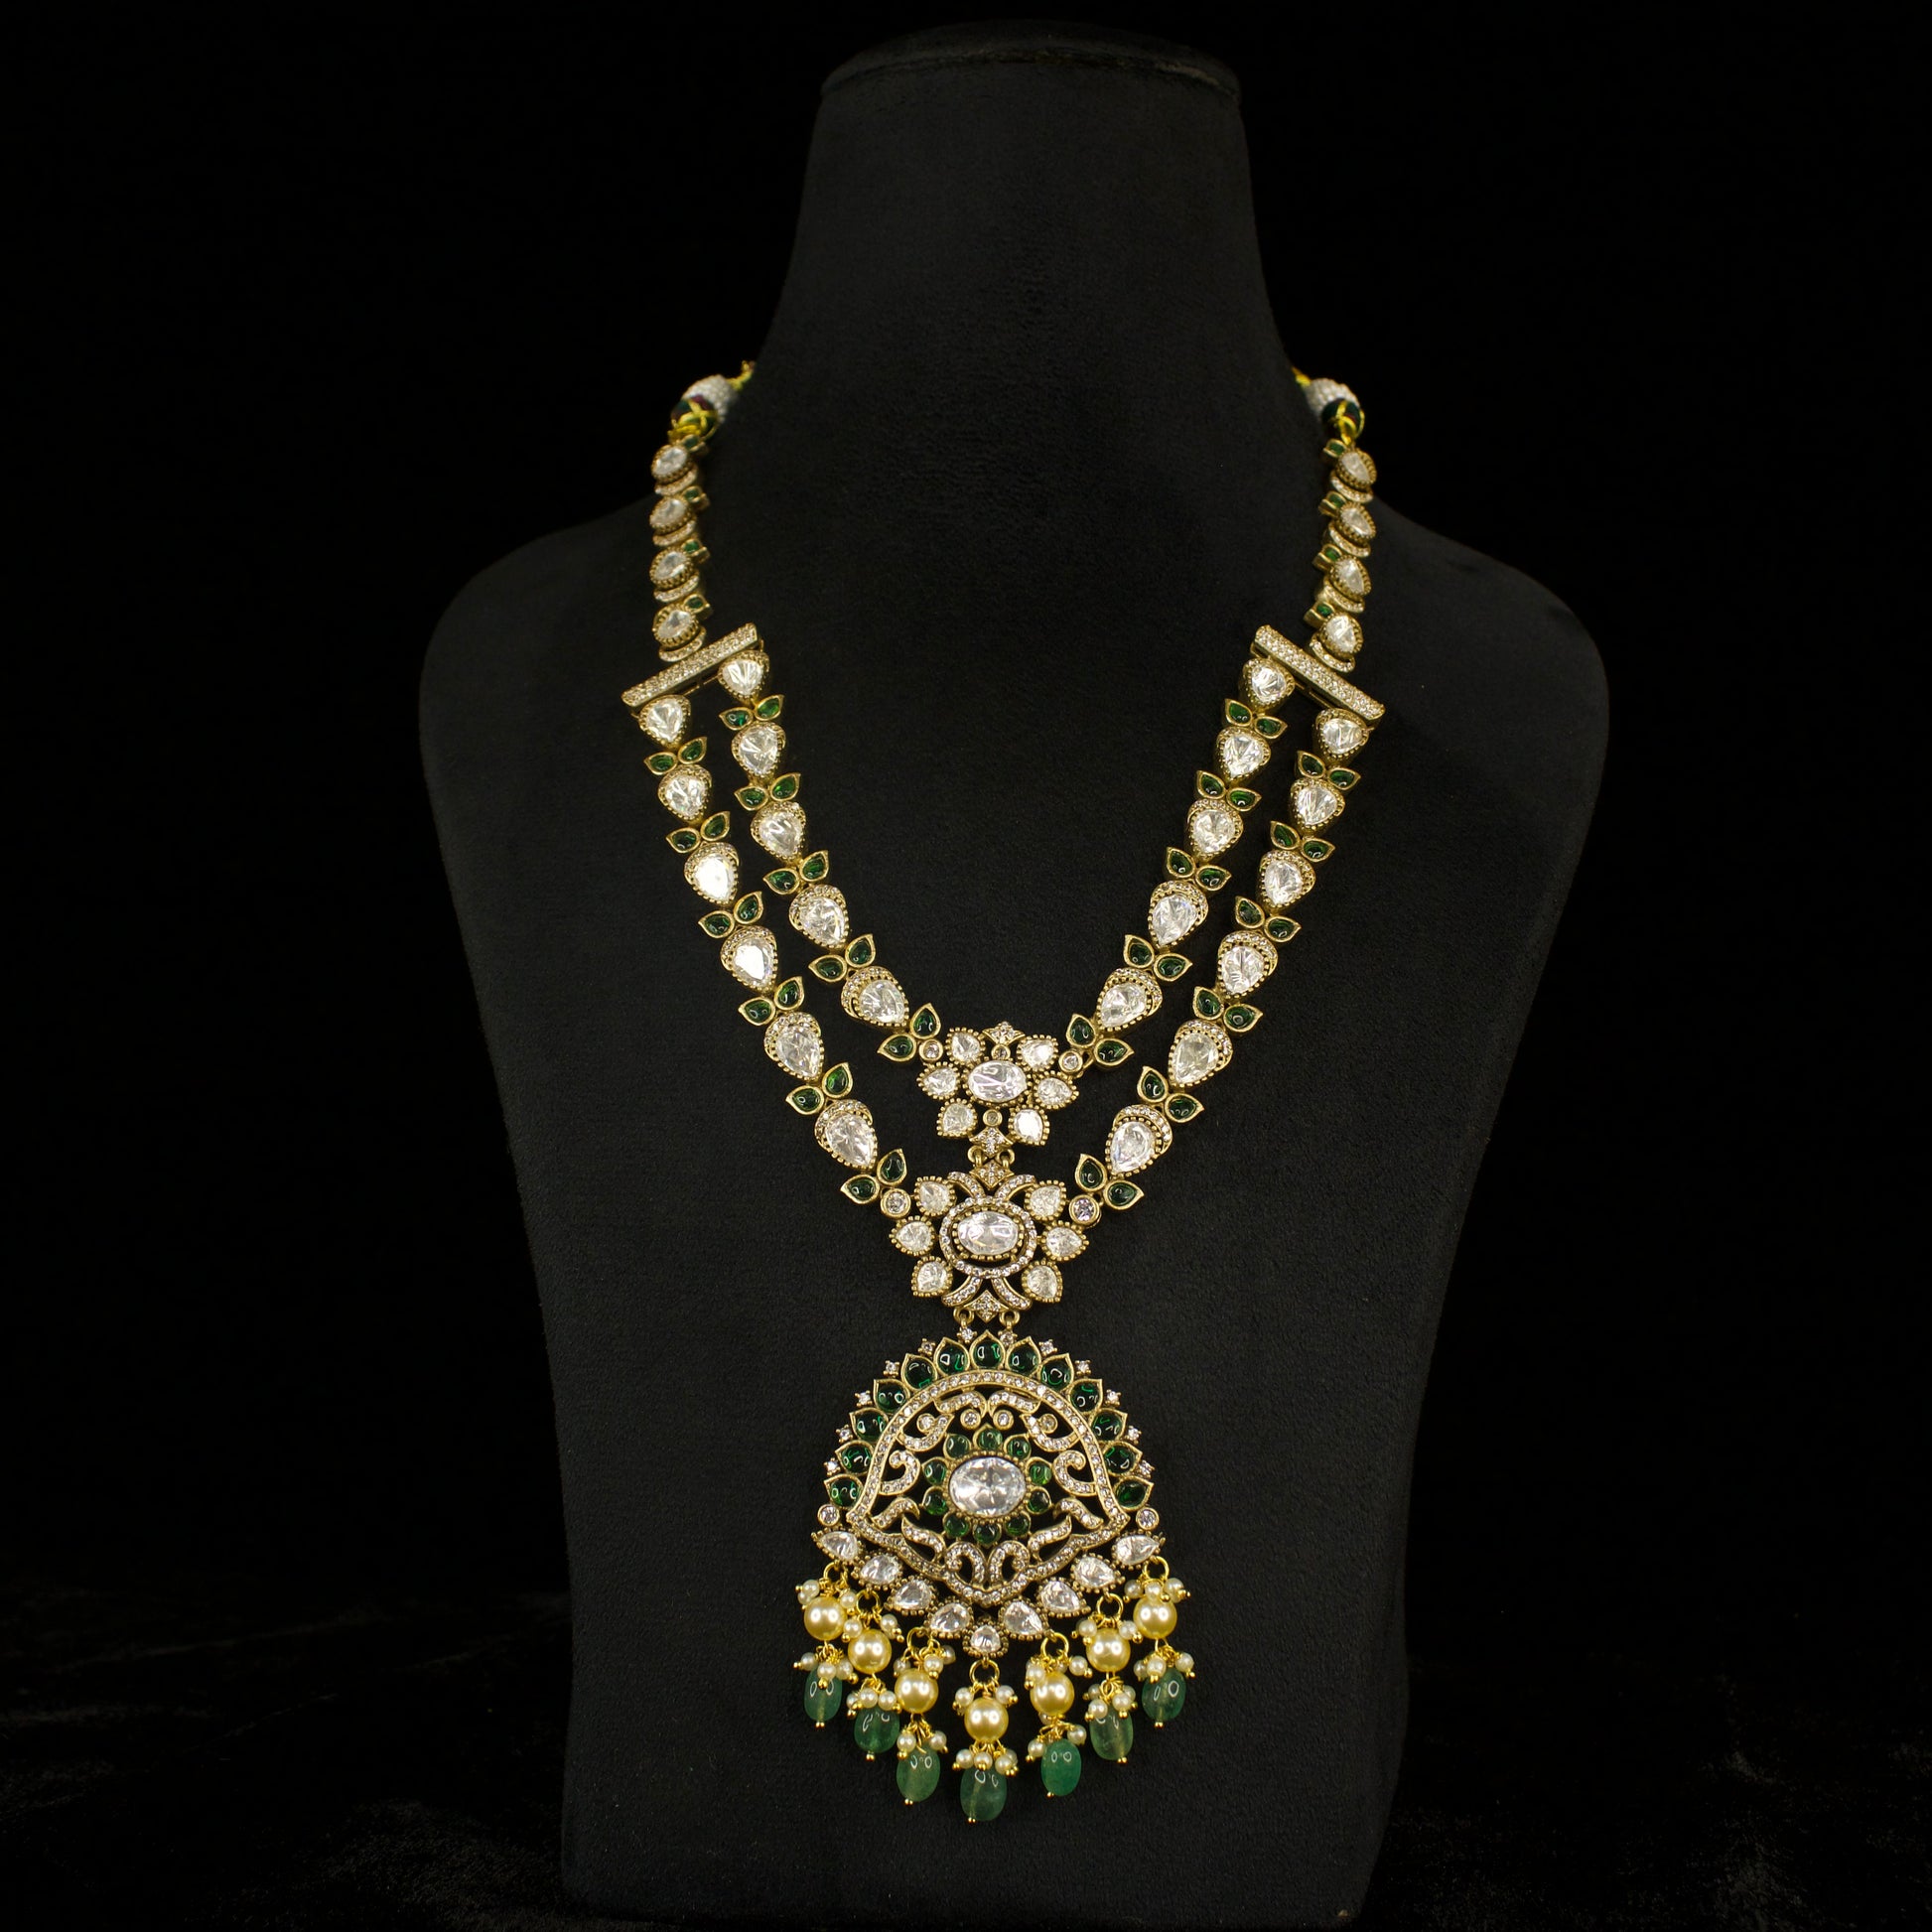 Two-Step Diamond Victorian Necklace Set with zircon, moissanite polki stones, pearls, and beads, including matching earrings. This Victorian Jewellery is available in Red & Green colour variants. 